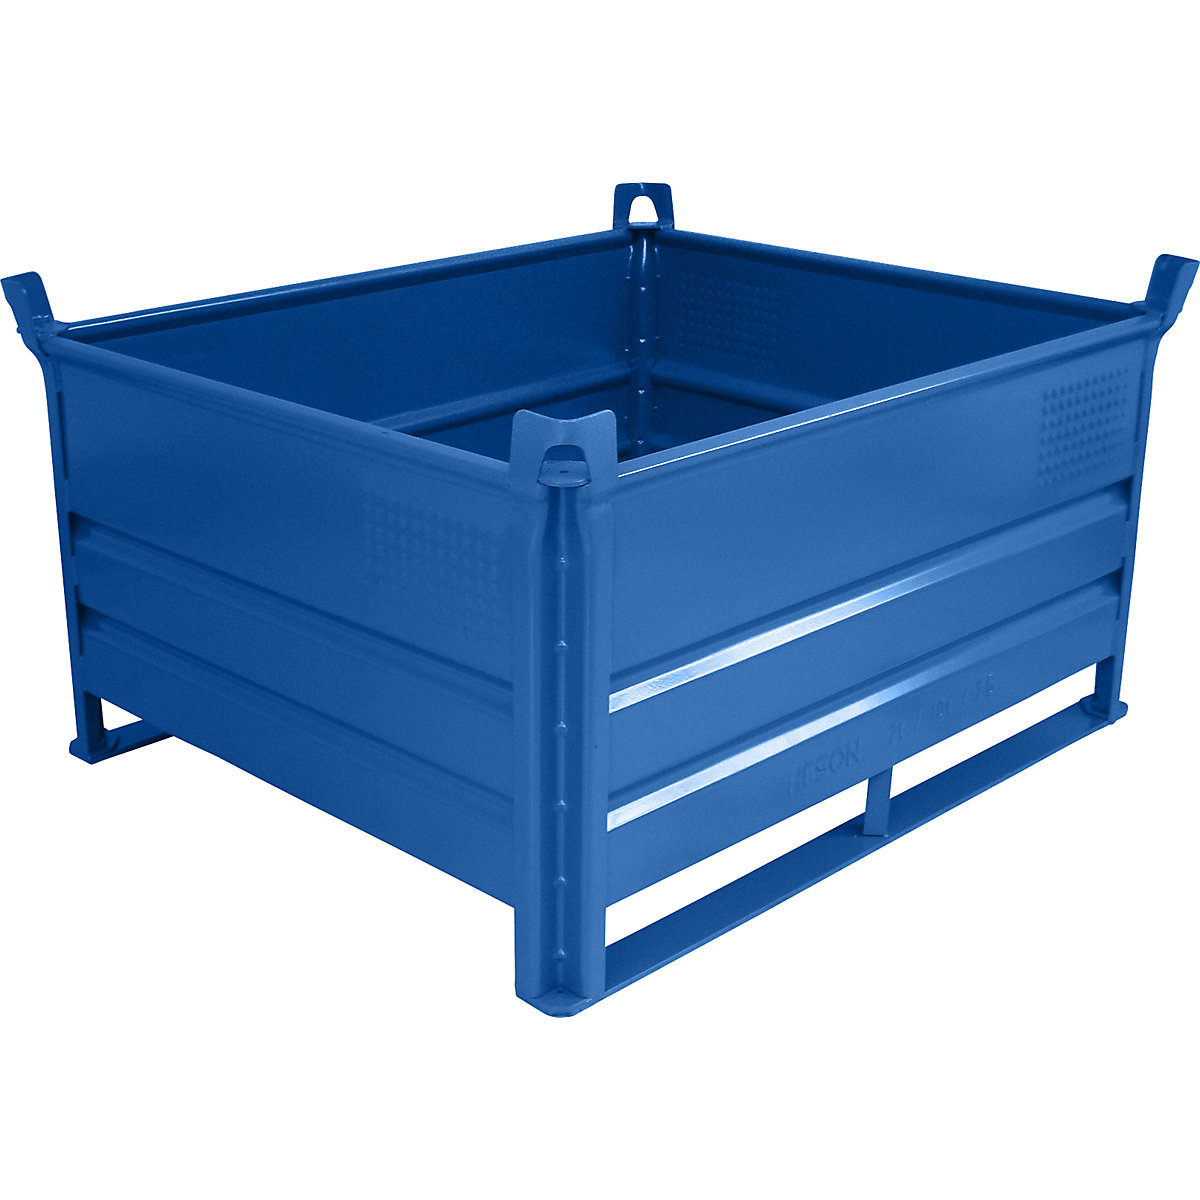 Stacking container with runners - Heson